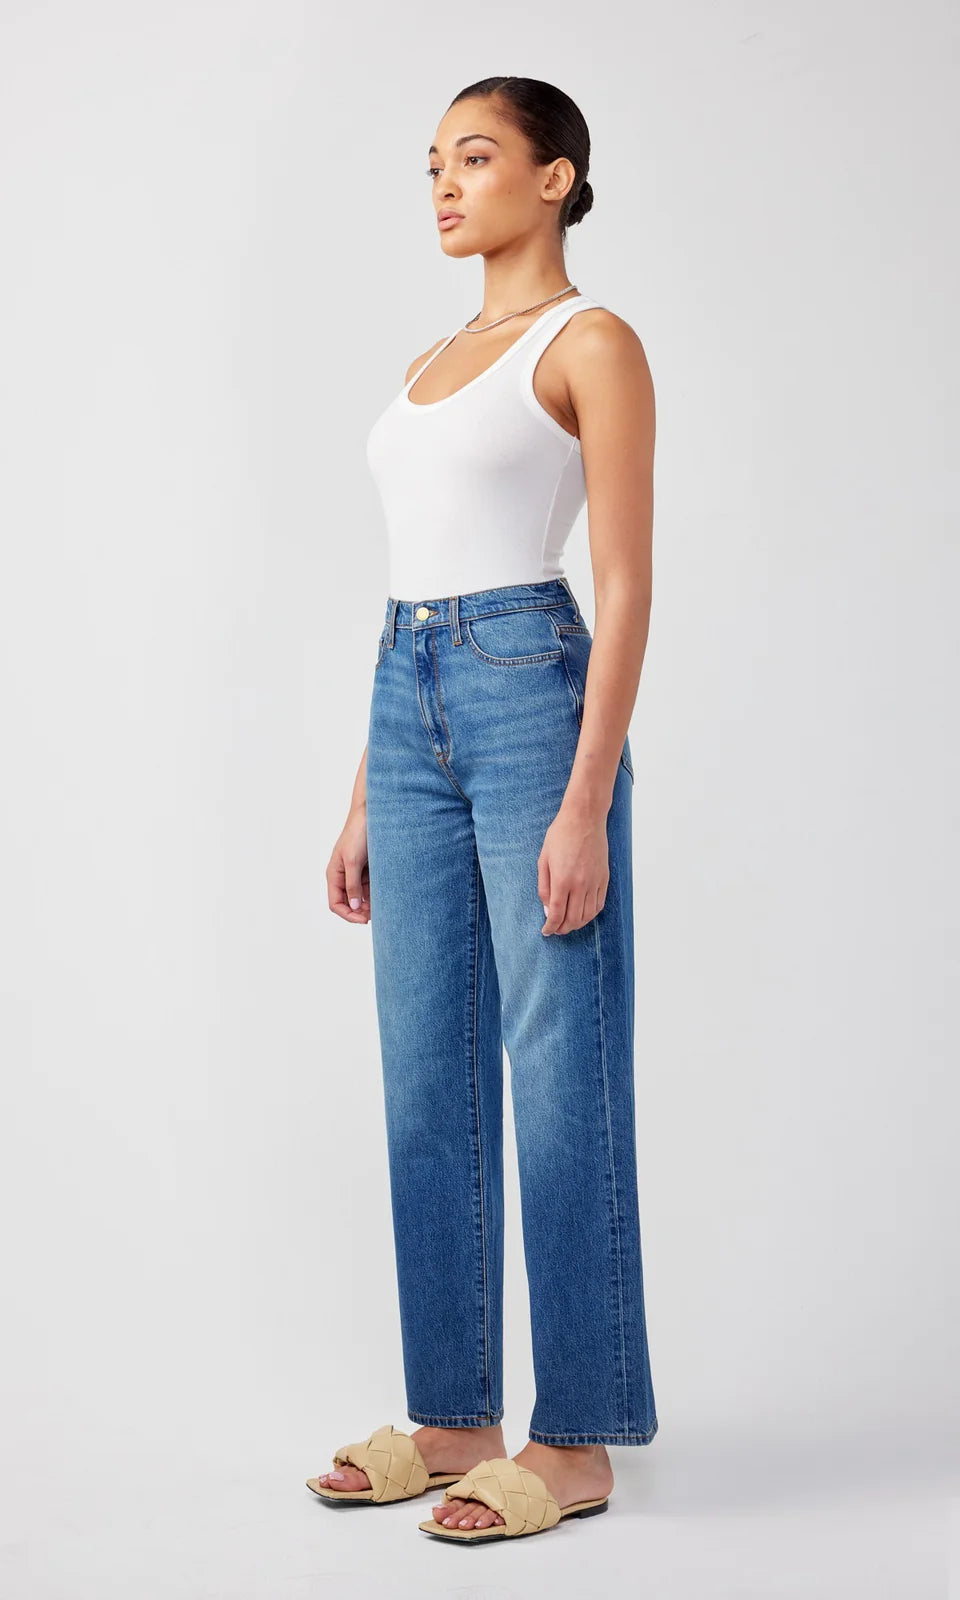 Triarchy Ms. Keaton High Rise Baggy Jeans